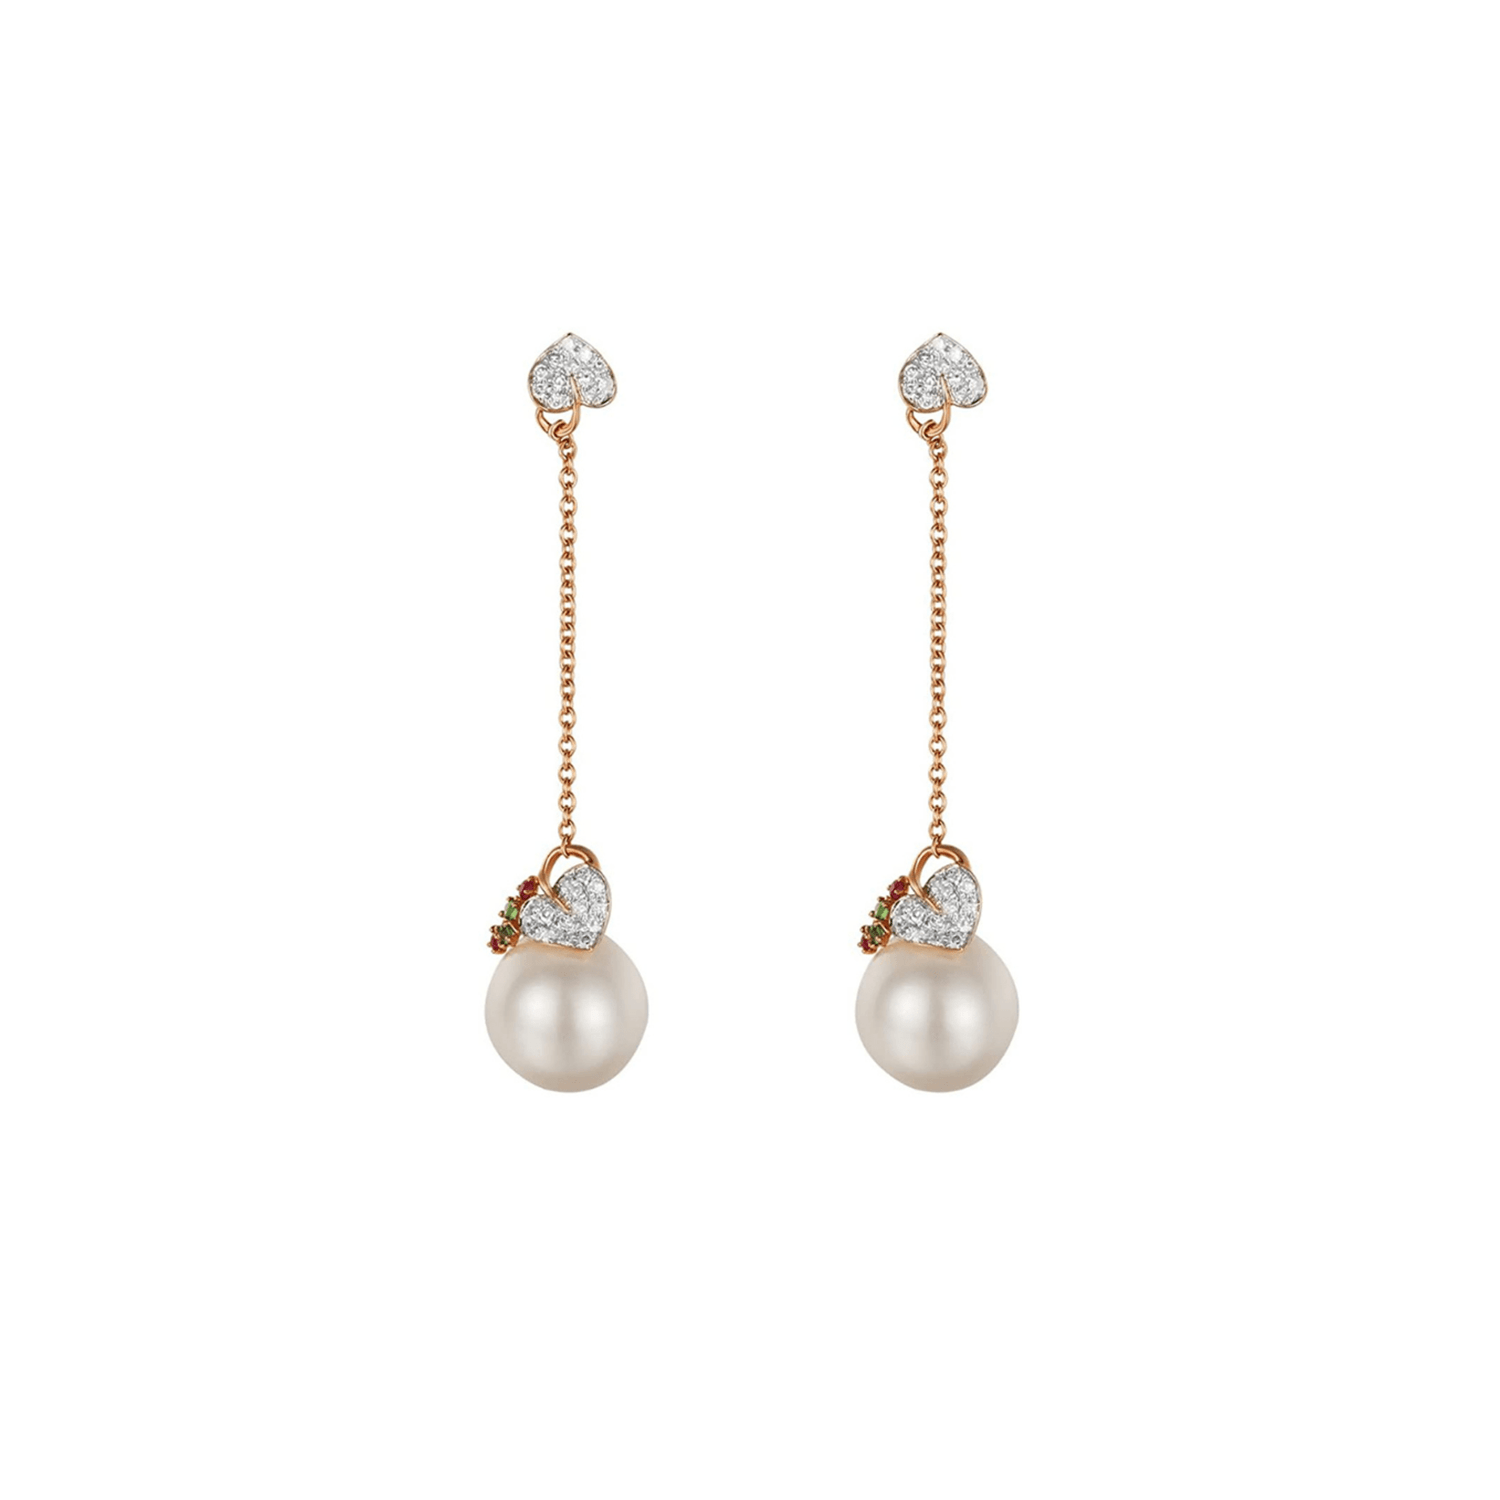 High quality white pearl drop earrings with white diamonds in 18k gold